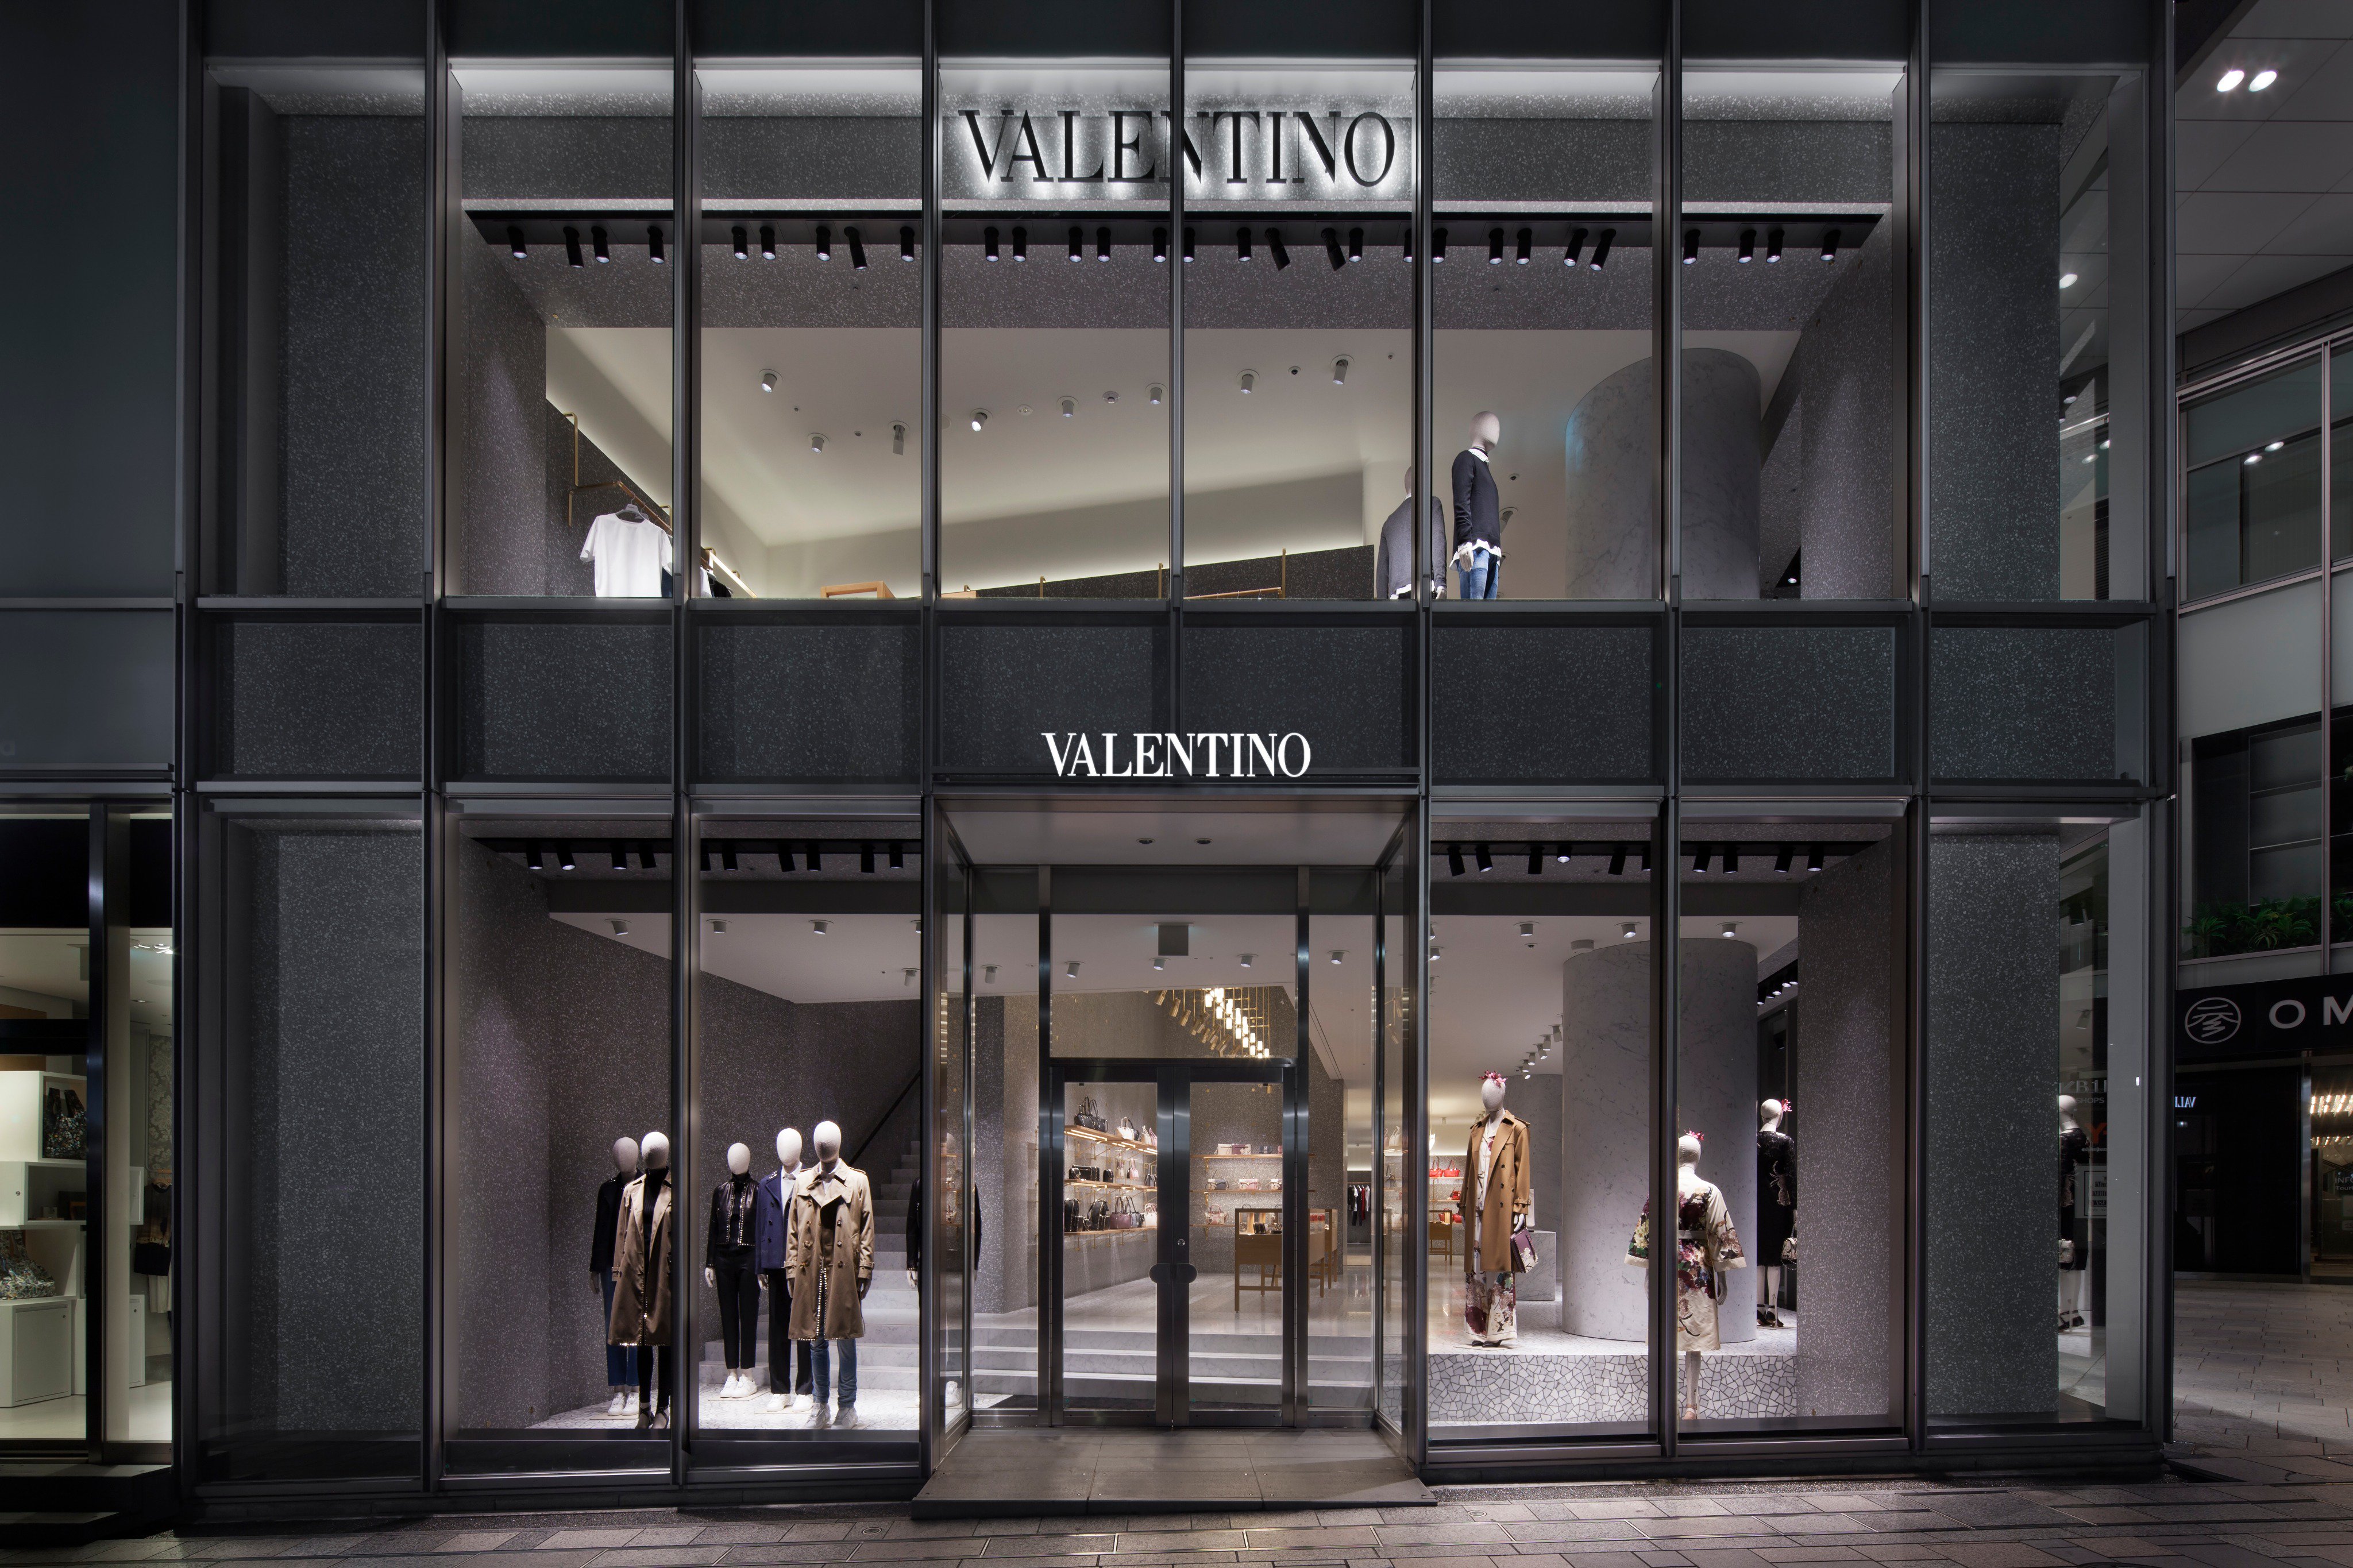 Valentino on Twitter: "The new #Omotesando boutique If in Tokyo be sure to make visit. #ValentinoOmotesando https://t.co/LGvwpvdmVc" / Twitter